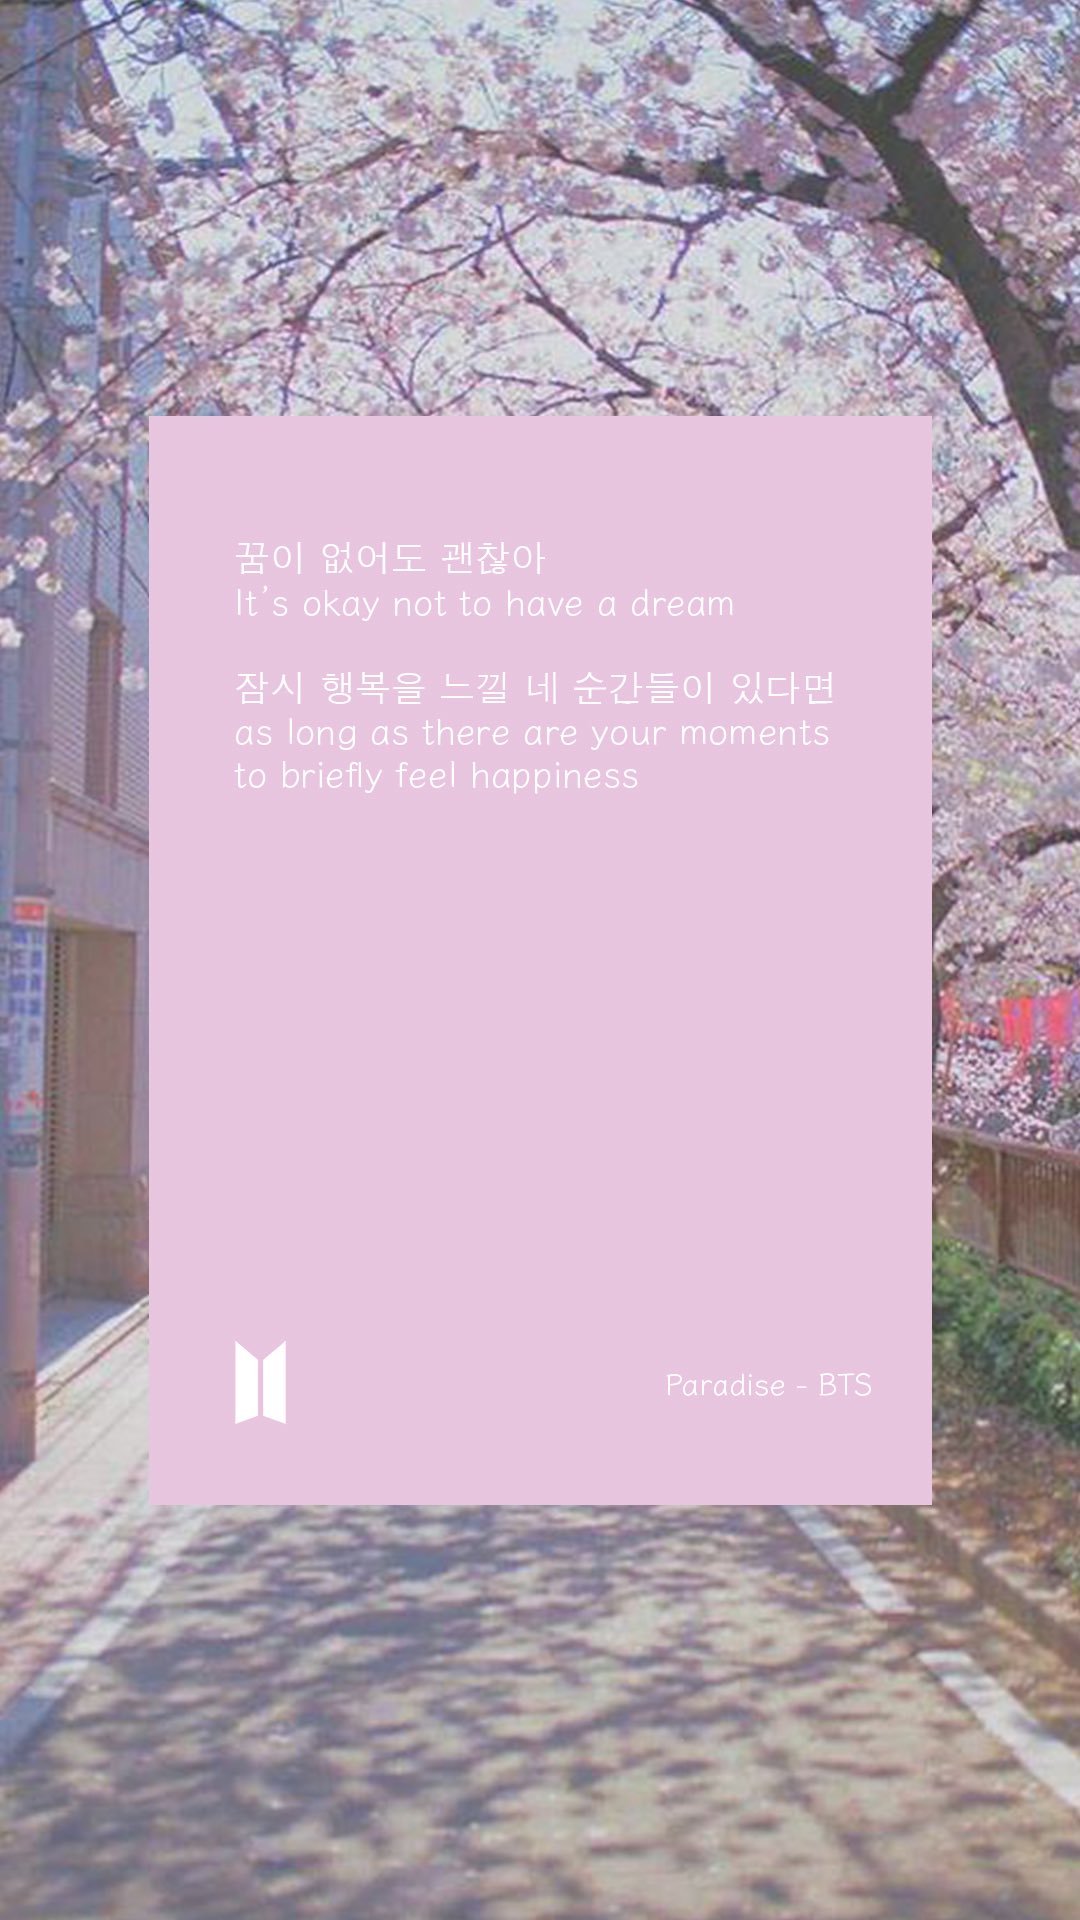 BTS Lyrics ⁷ on X: As long as there are moments to briefly feel happiness.  Paradise - BTS --- @BTS_twt #lyrics #quotes #inspiration #wallpaper  #lockscreen #aesthetic #mood #paradise #MotivationMonday #life  #WednesdayWisdom  /